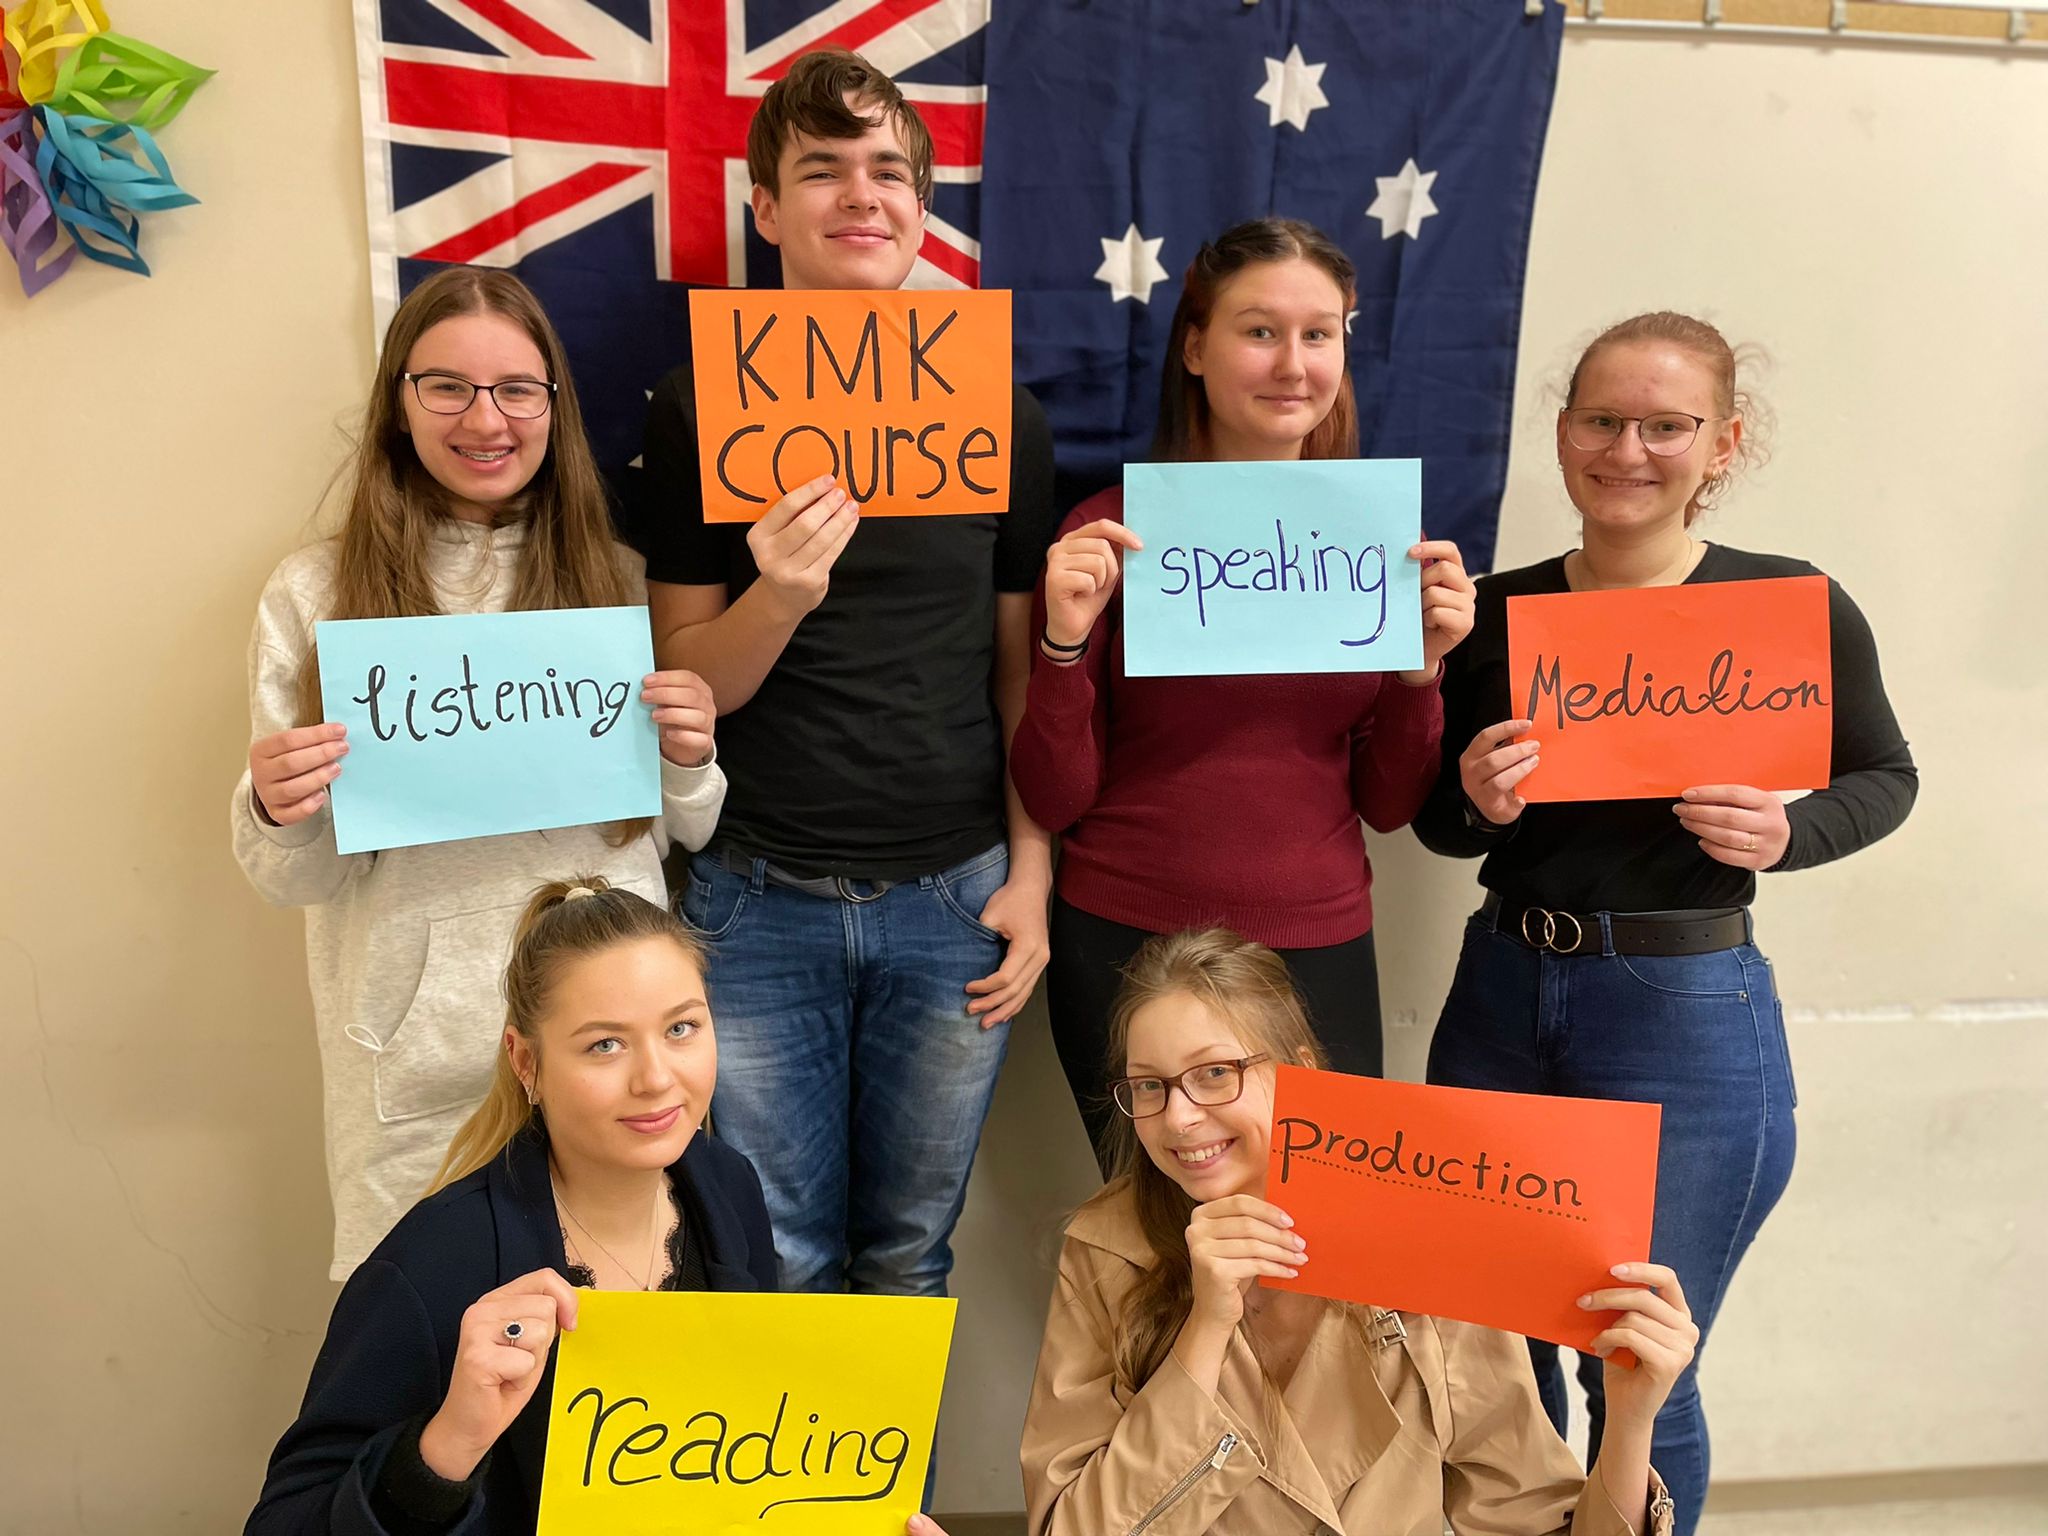 How to improve your English skills – Enroll and join the “KMK” team!